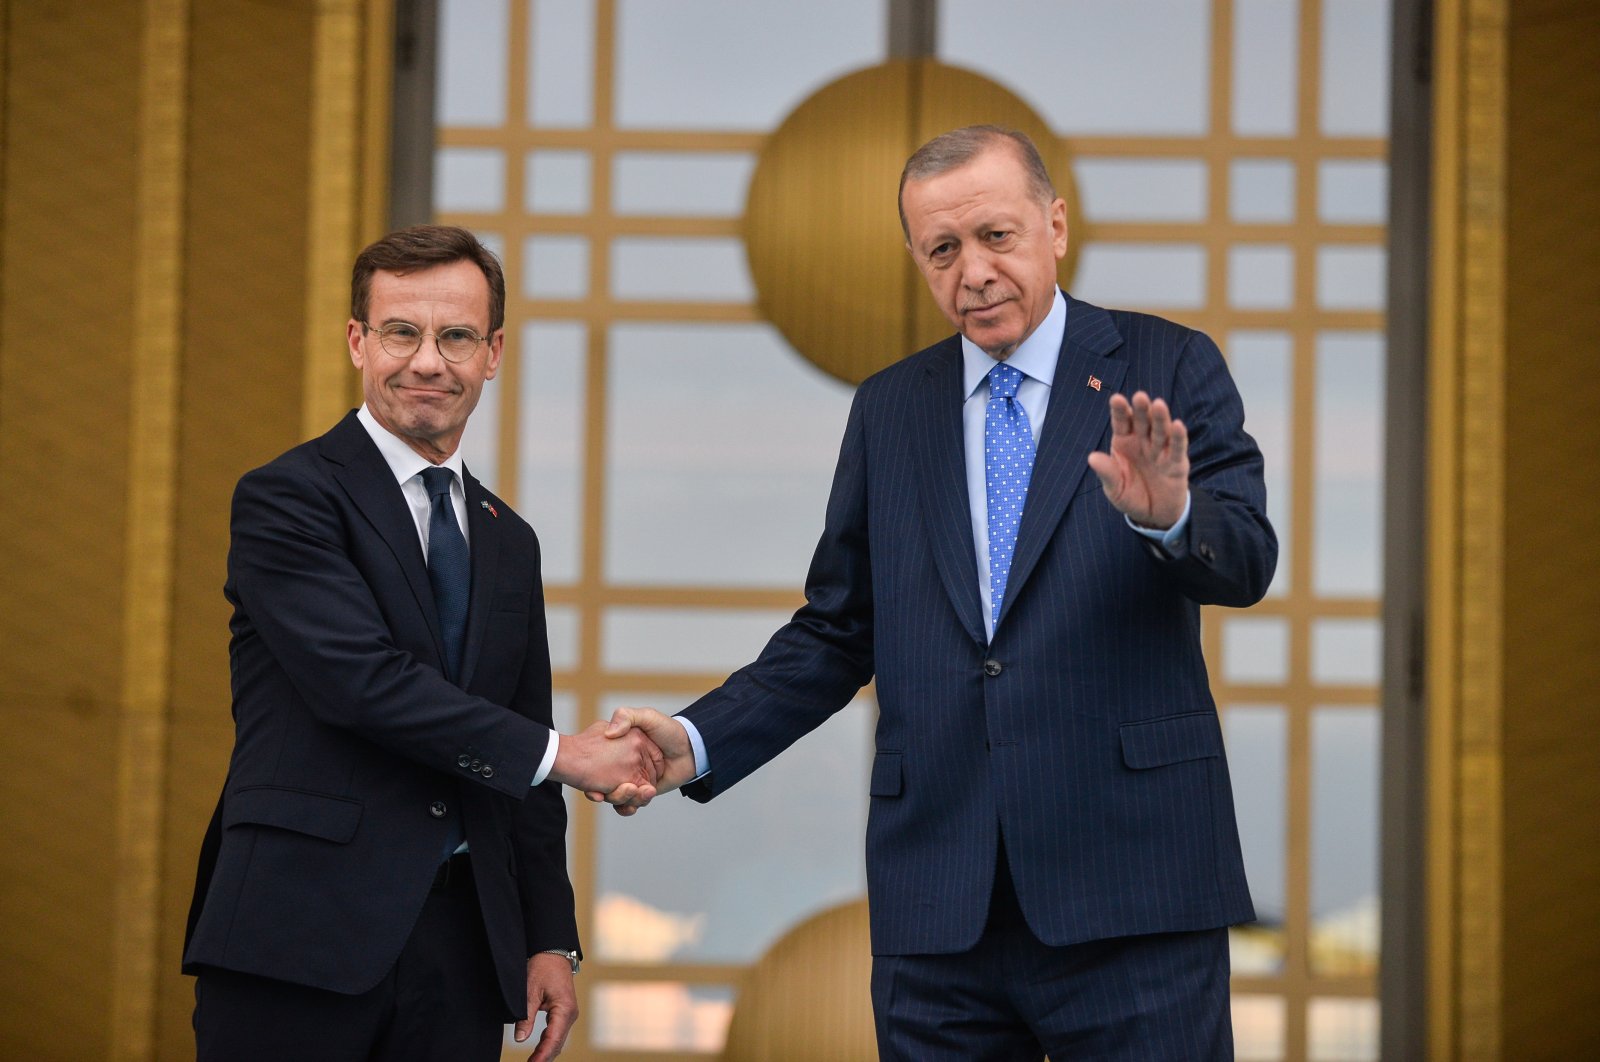 President Recep Tayyip Erdoğan and Swedish Prime Minister Ulf Kristersson (L) shaking hands during a welcome ceremony at the Presidential Complex in Ankara, Türkiye, Nov. 8, 2022. (EPA Photo)